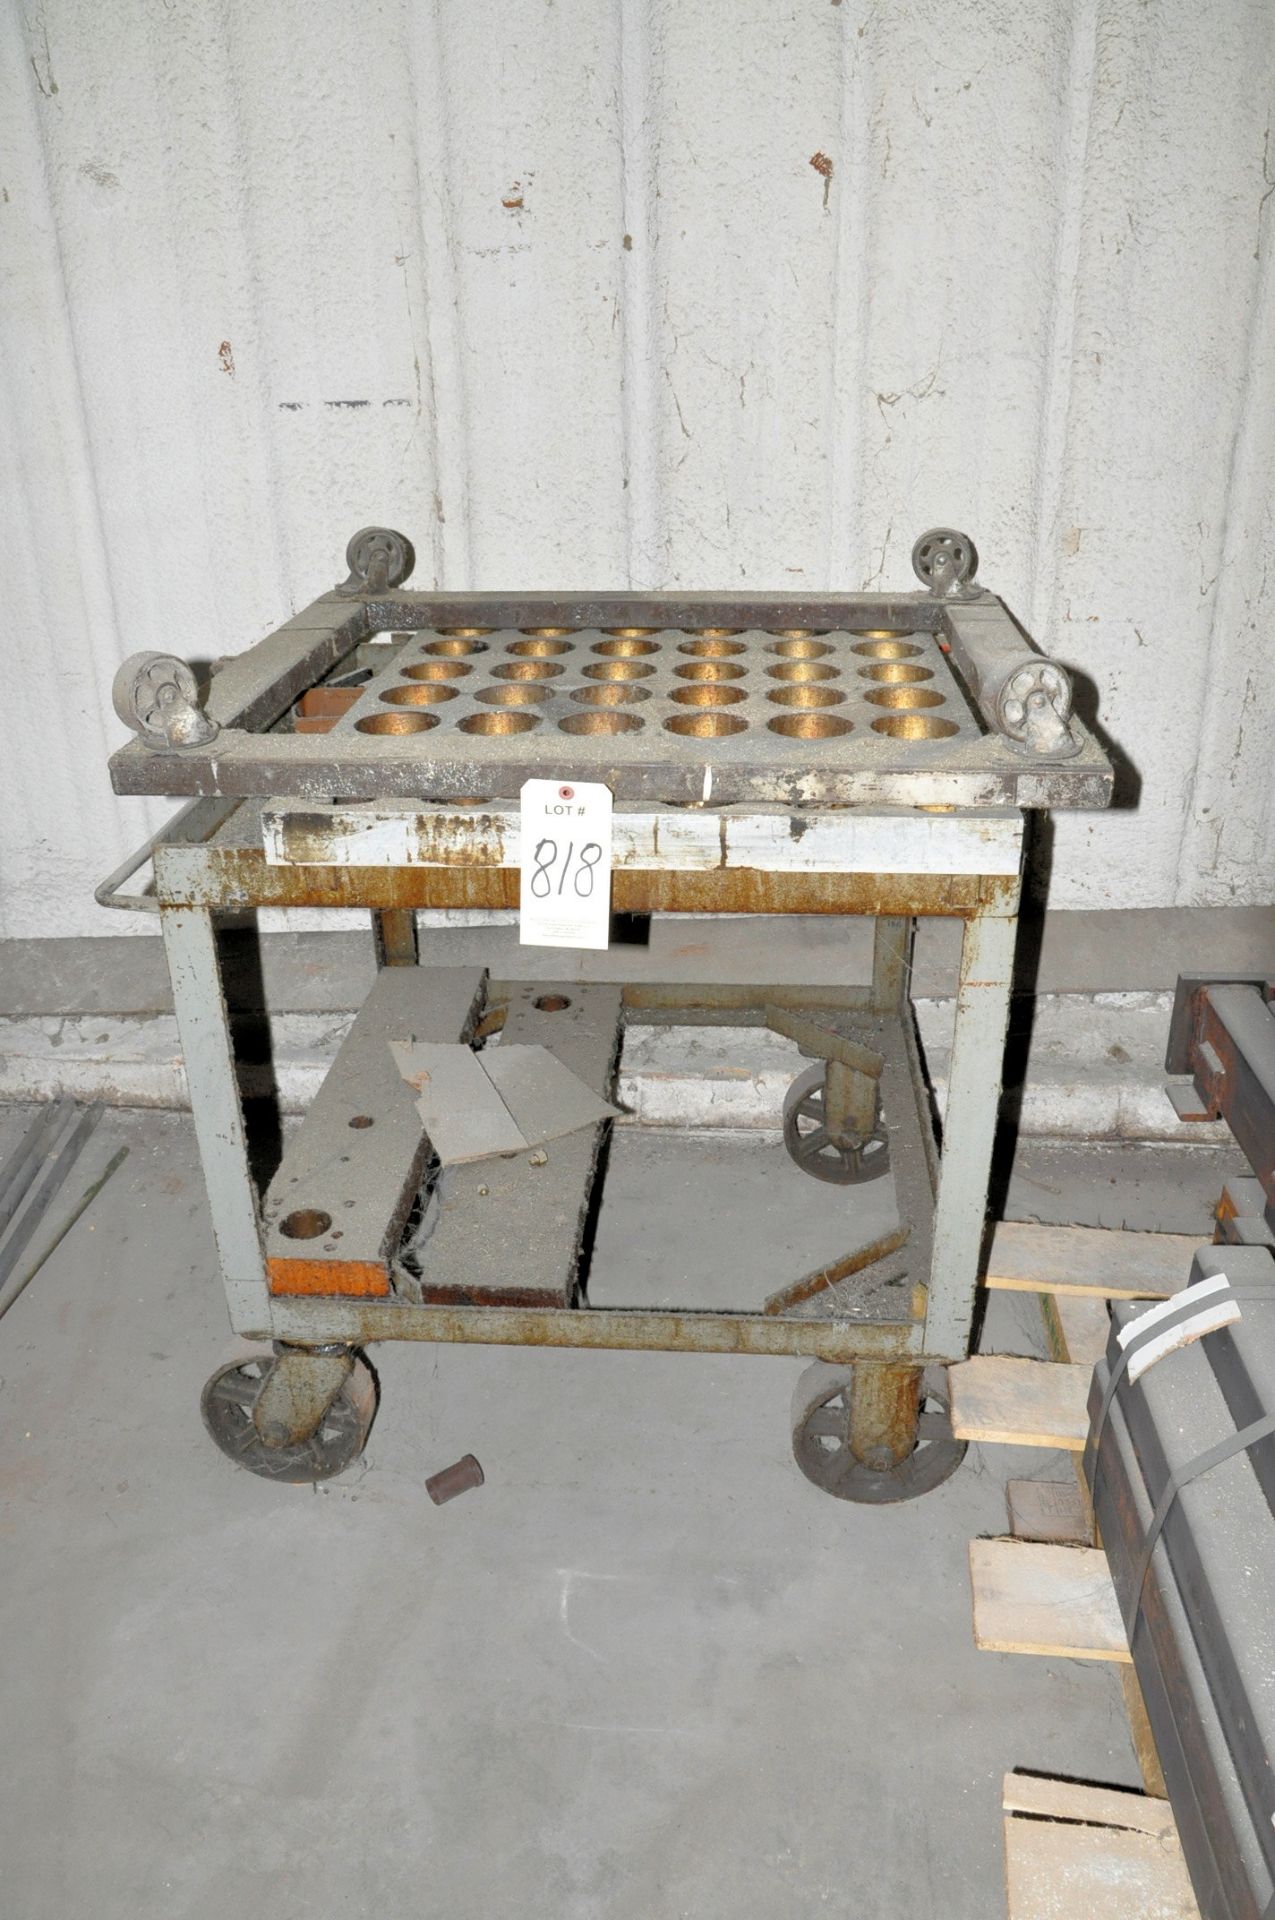 Lot-Various Metal Stock on (3) Pallets and (1) Cart - Image 3 of 4